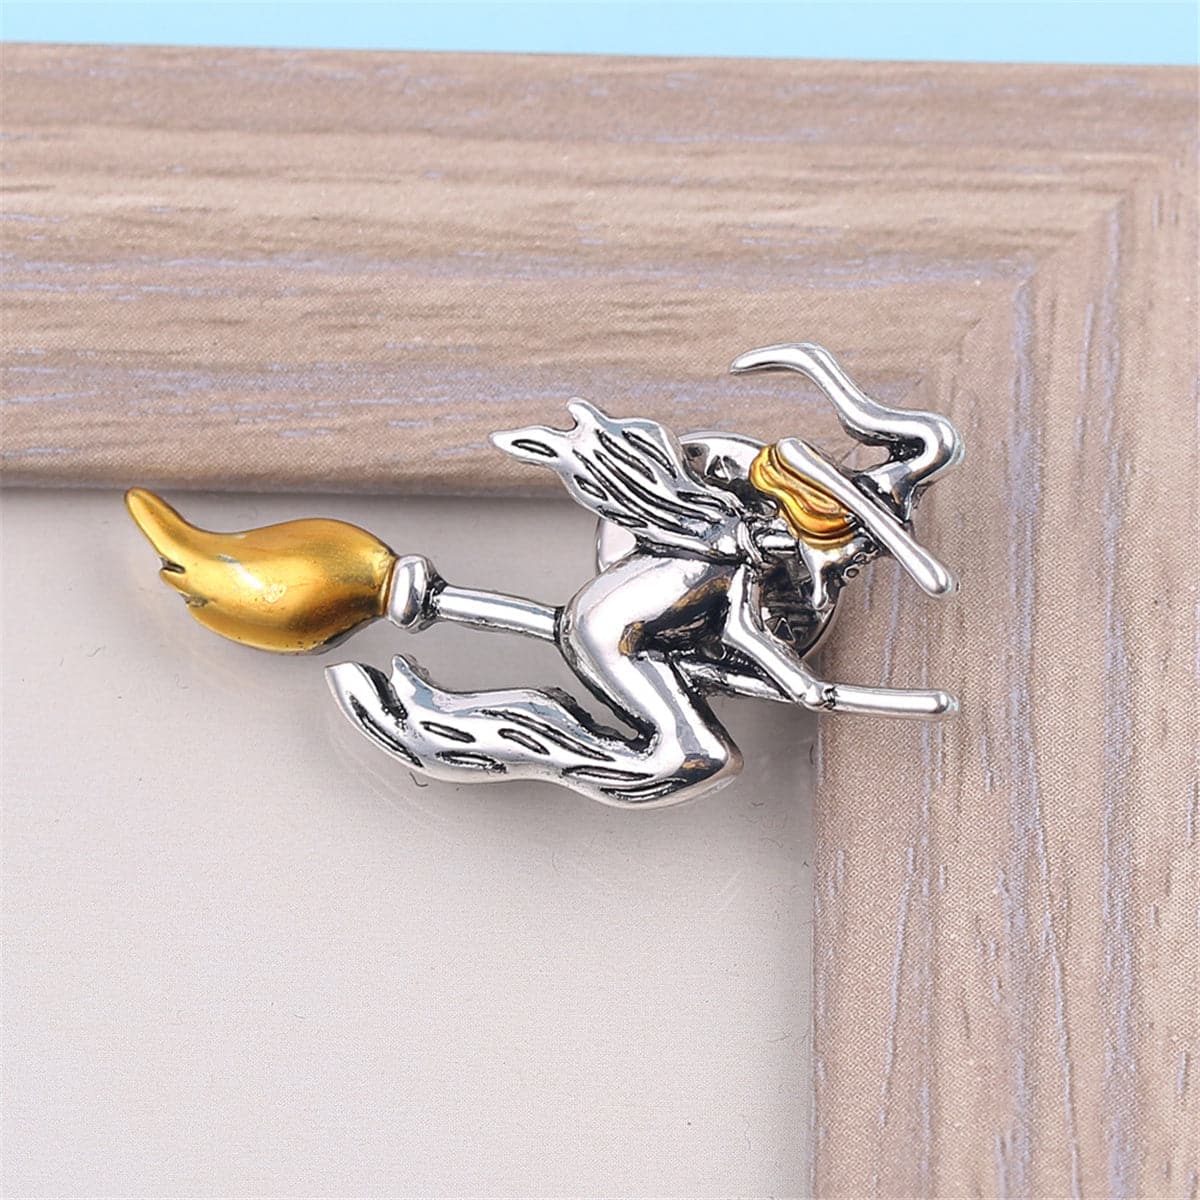 Yellow & Silver-Plated Flying Witch Brooch